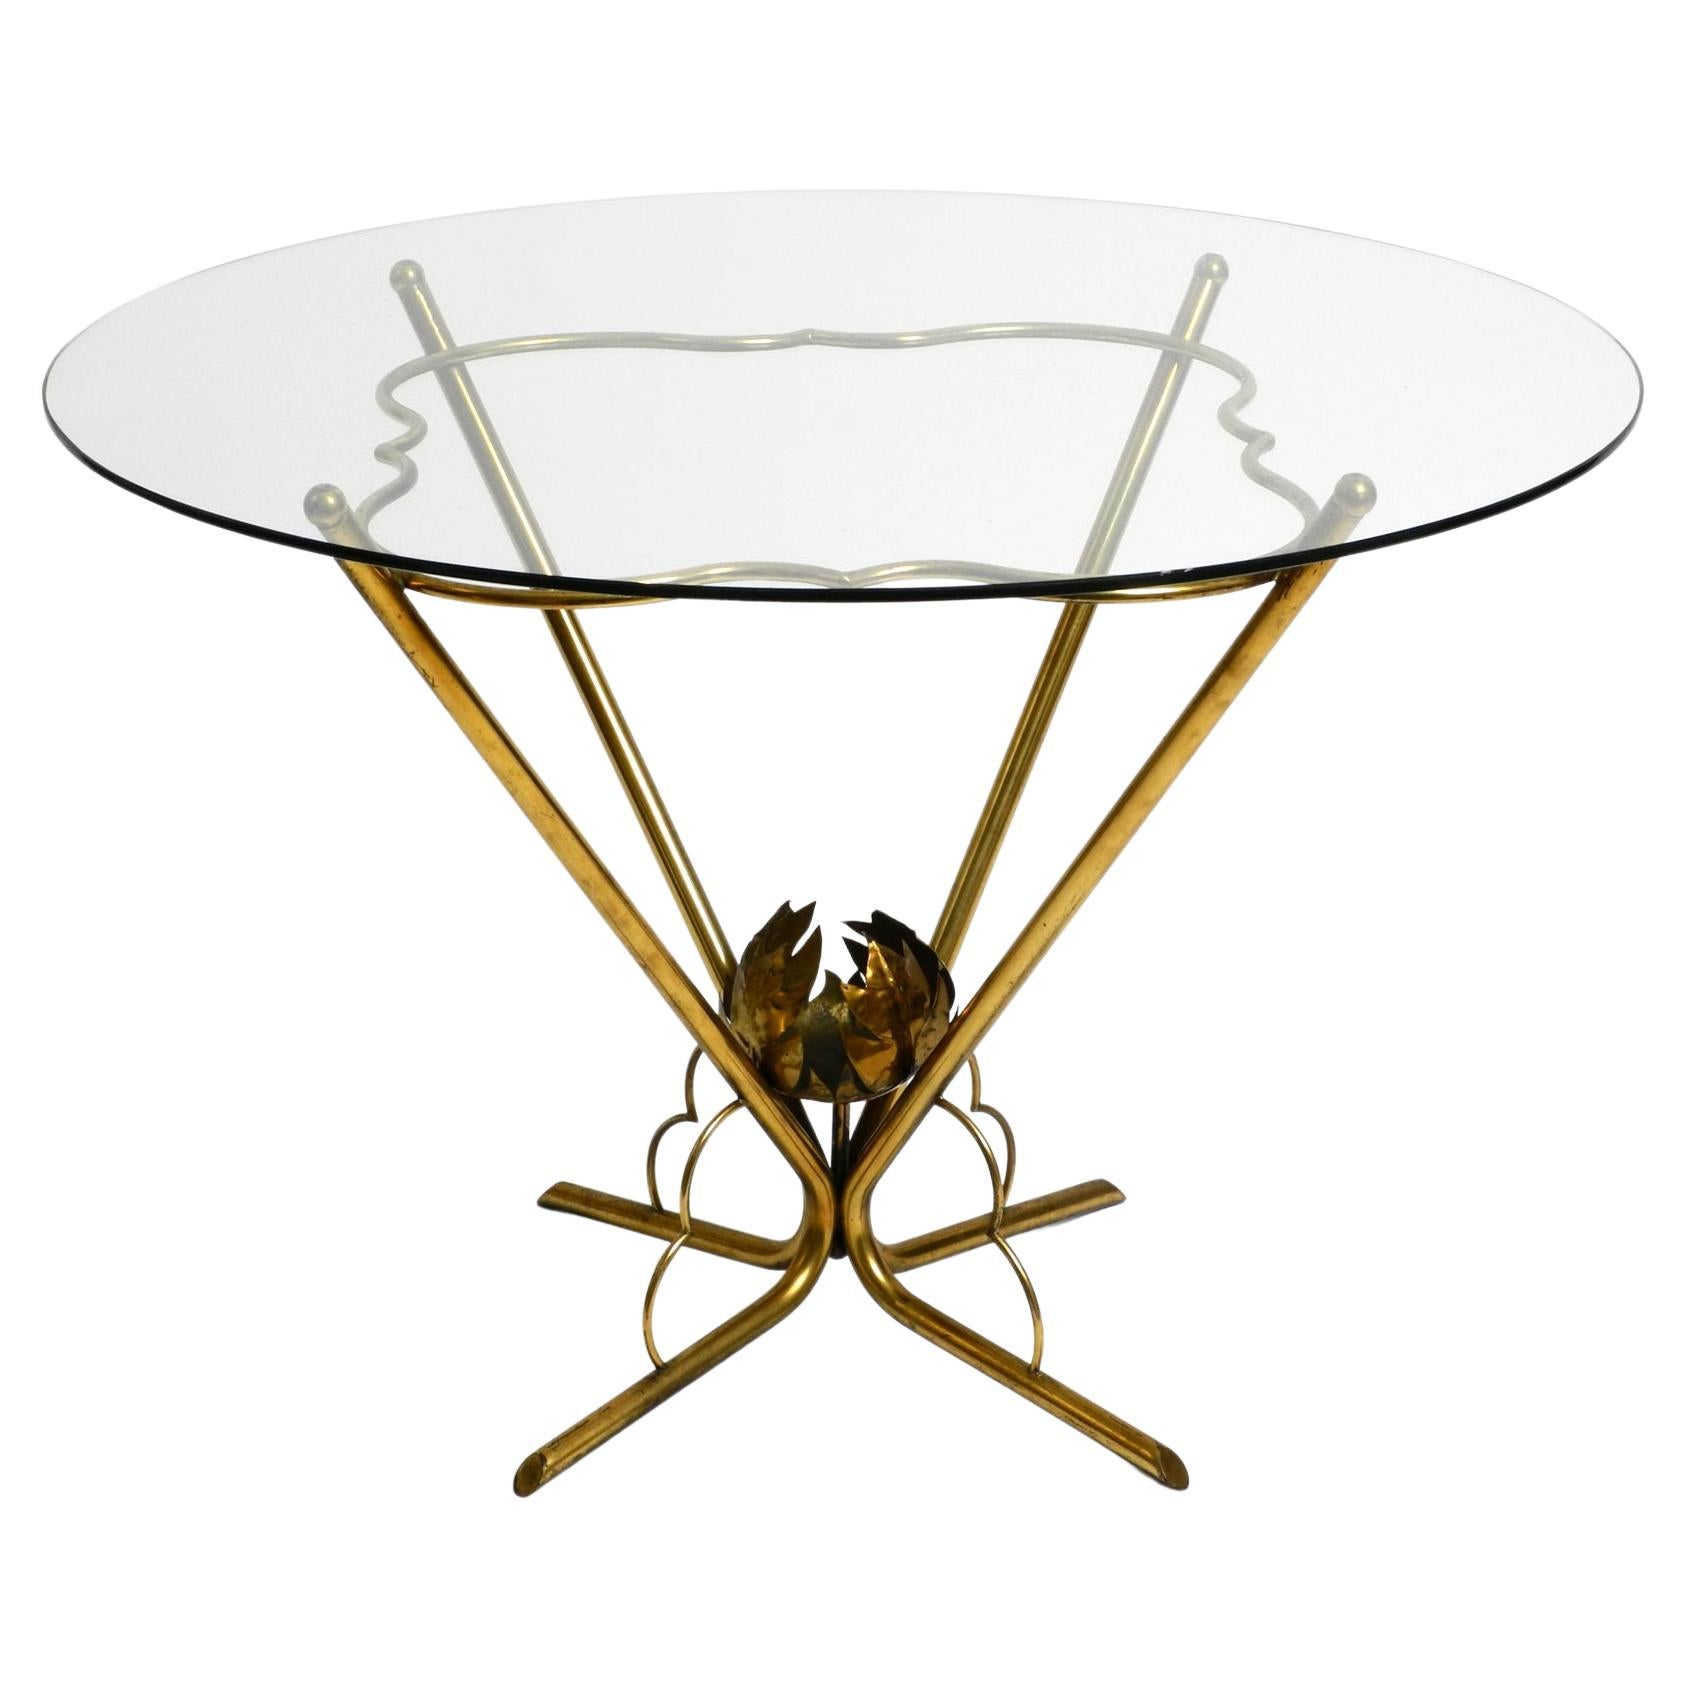 Beautiful very rare Italian mid-century round glass brass floral side table